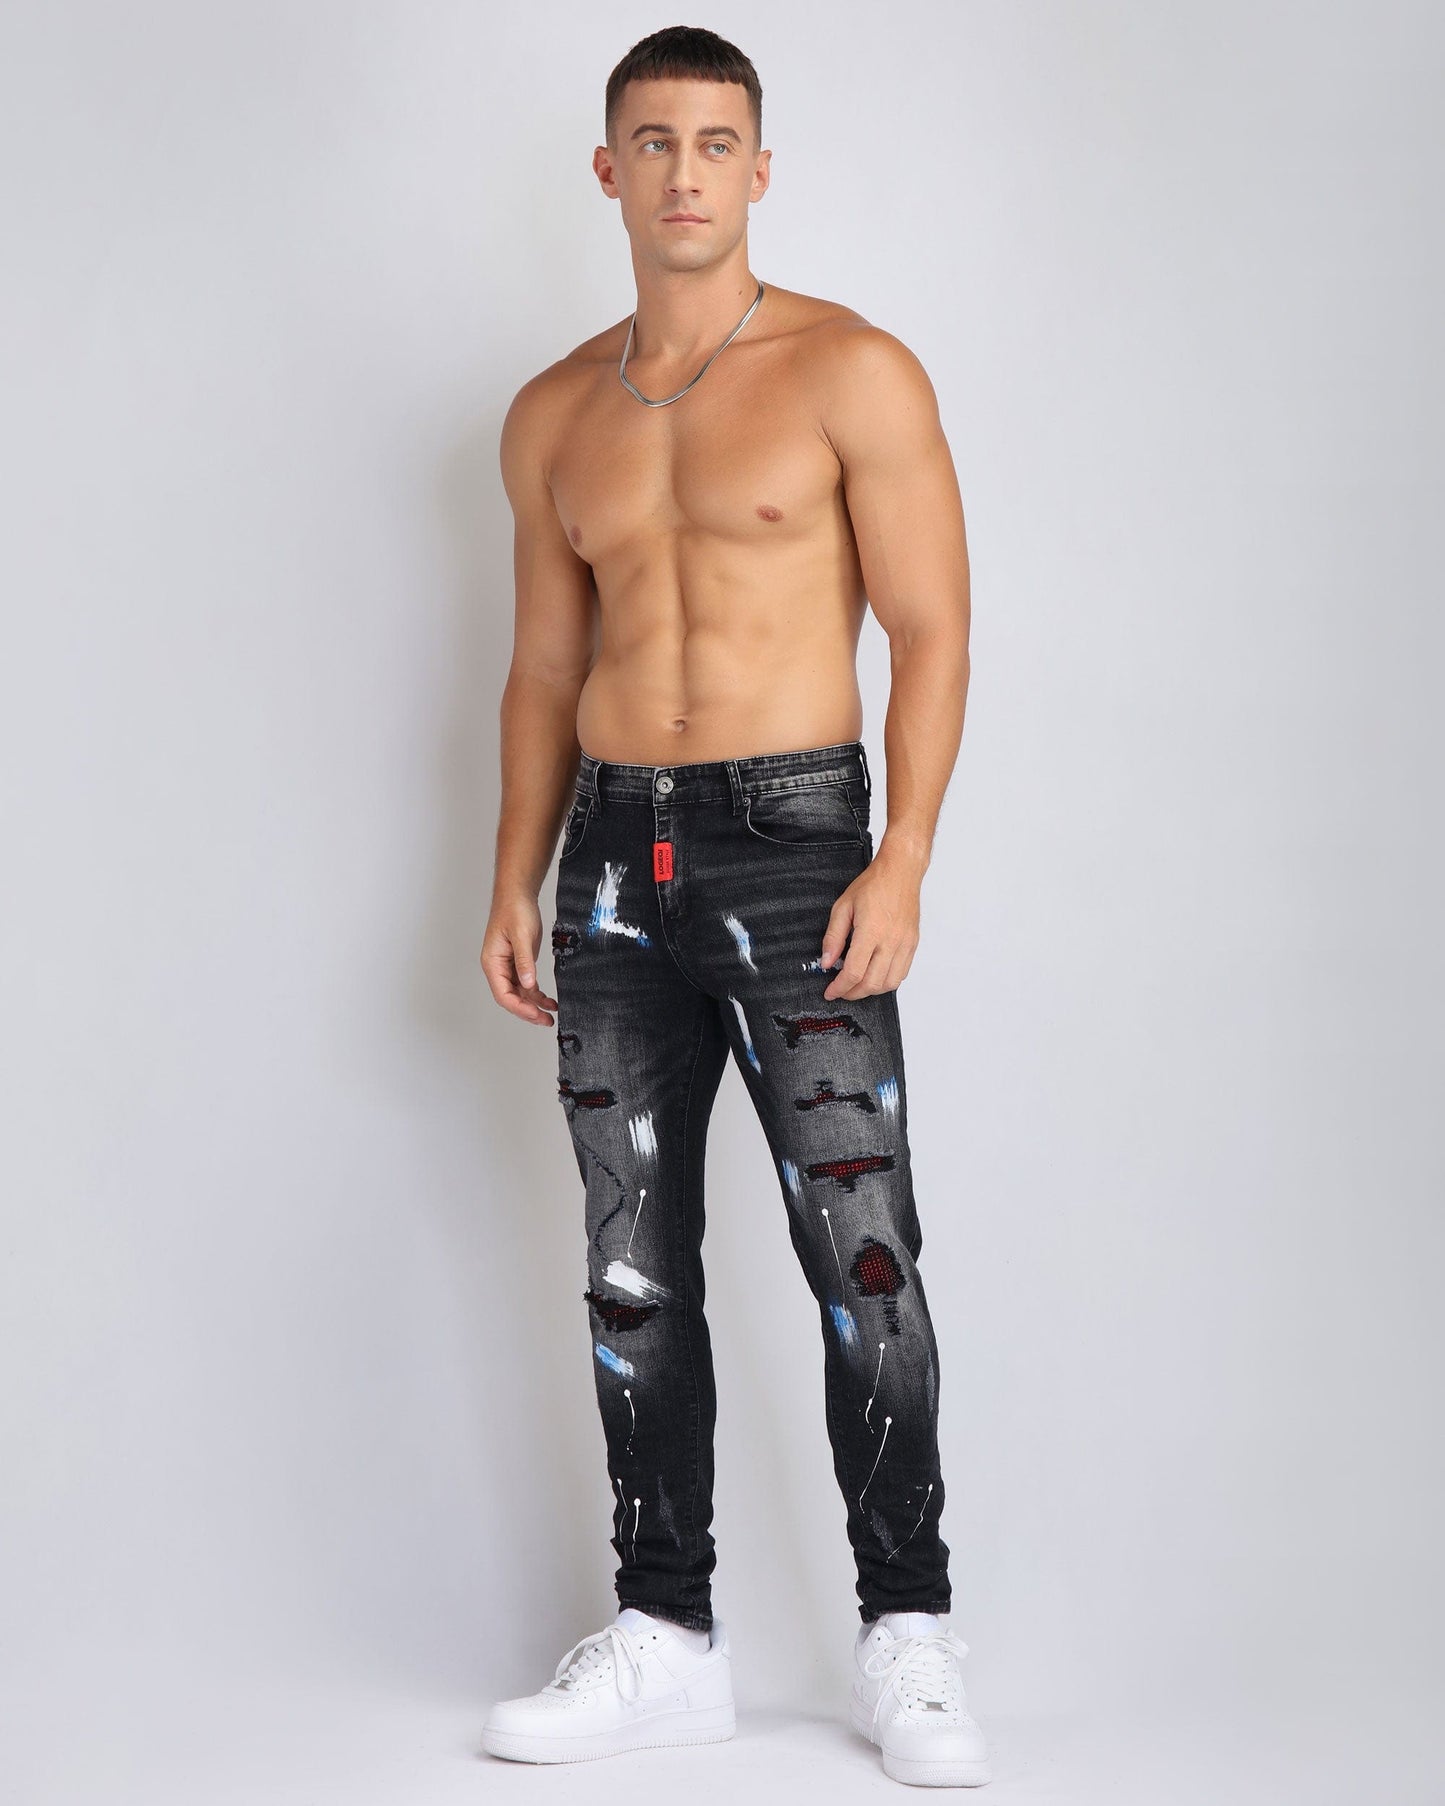 Street Art Chic Ripped Black Jeans with Graffiti Paint Drawing - CLASSY CLOSET BOUTIQUE